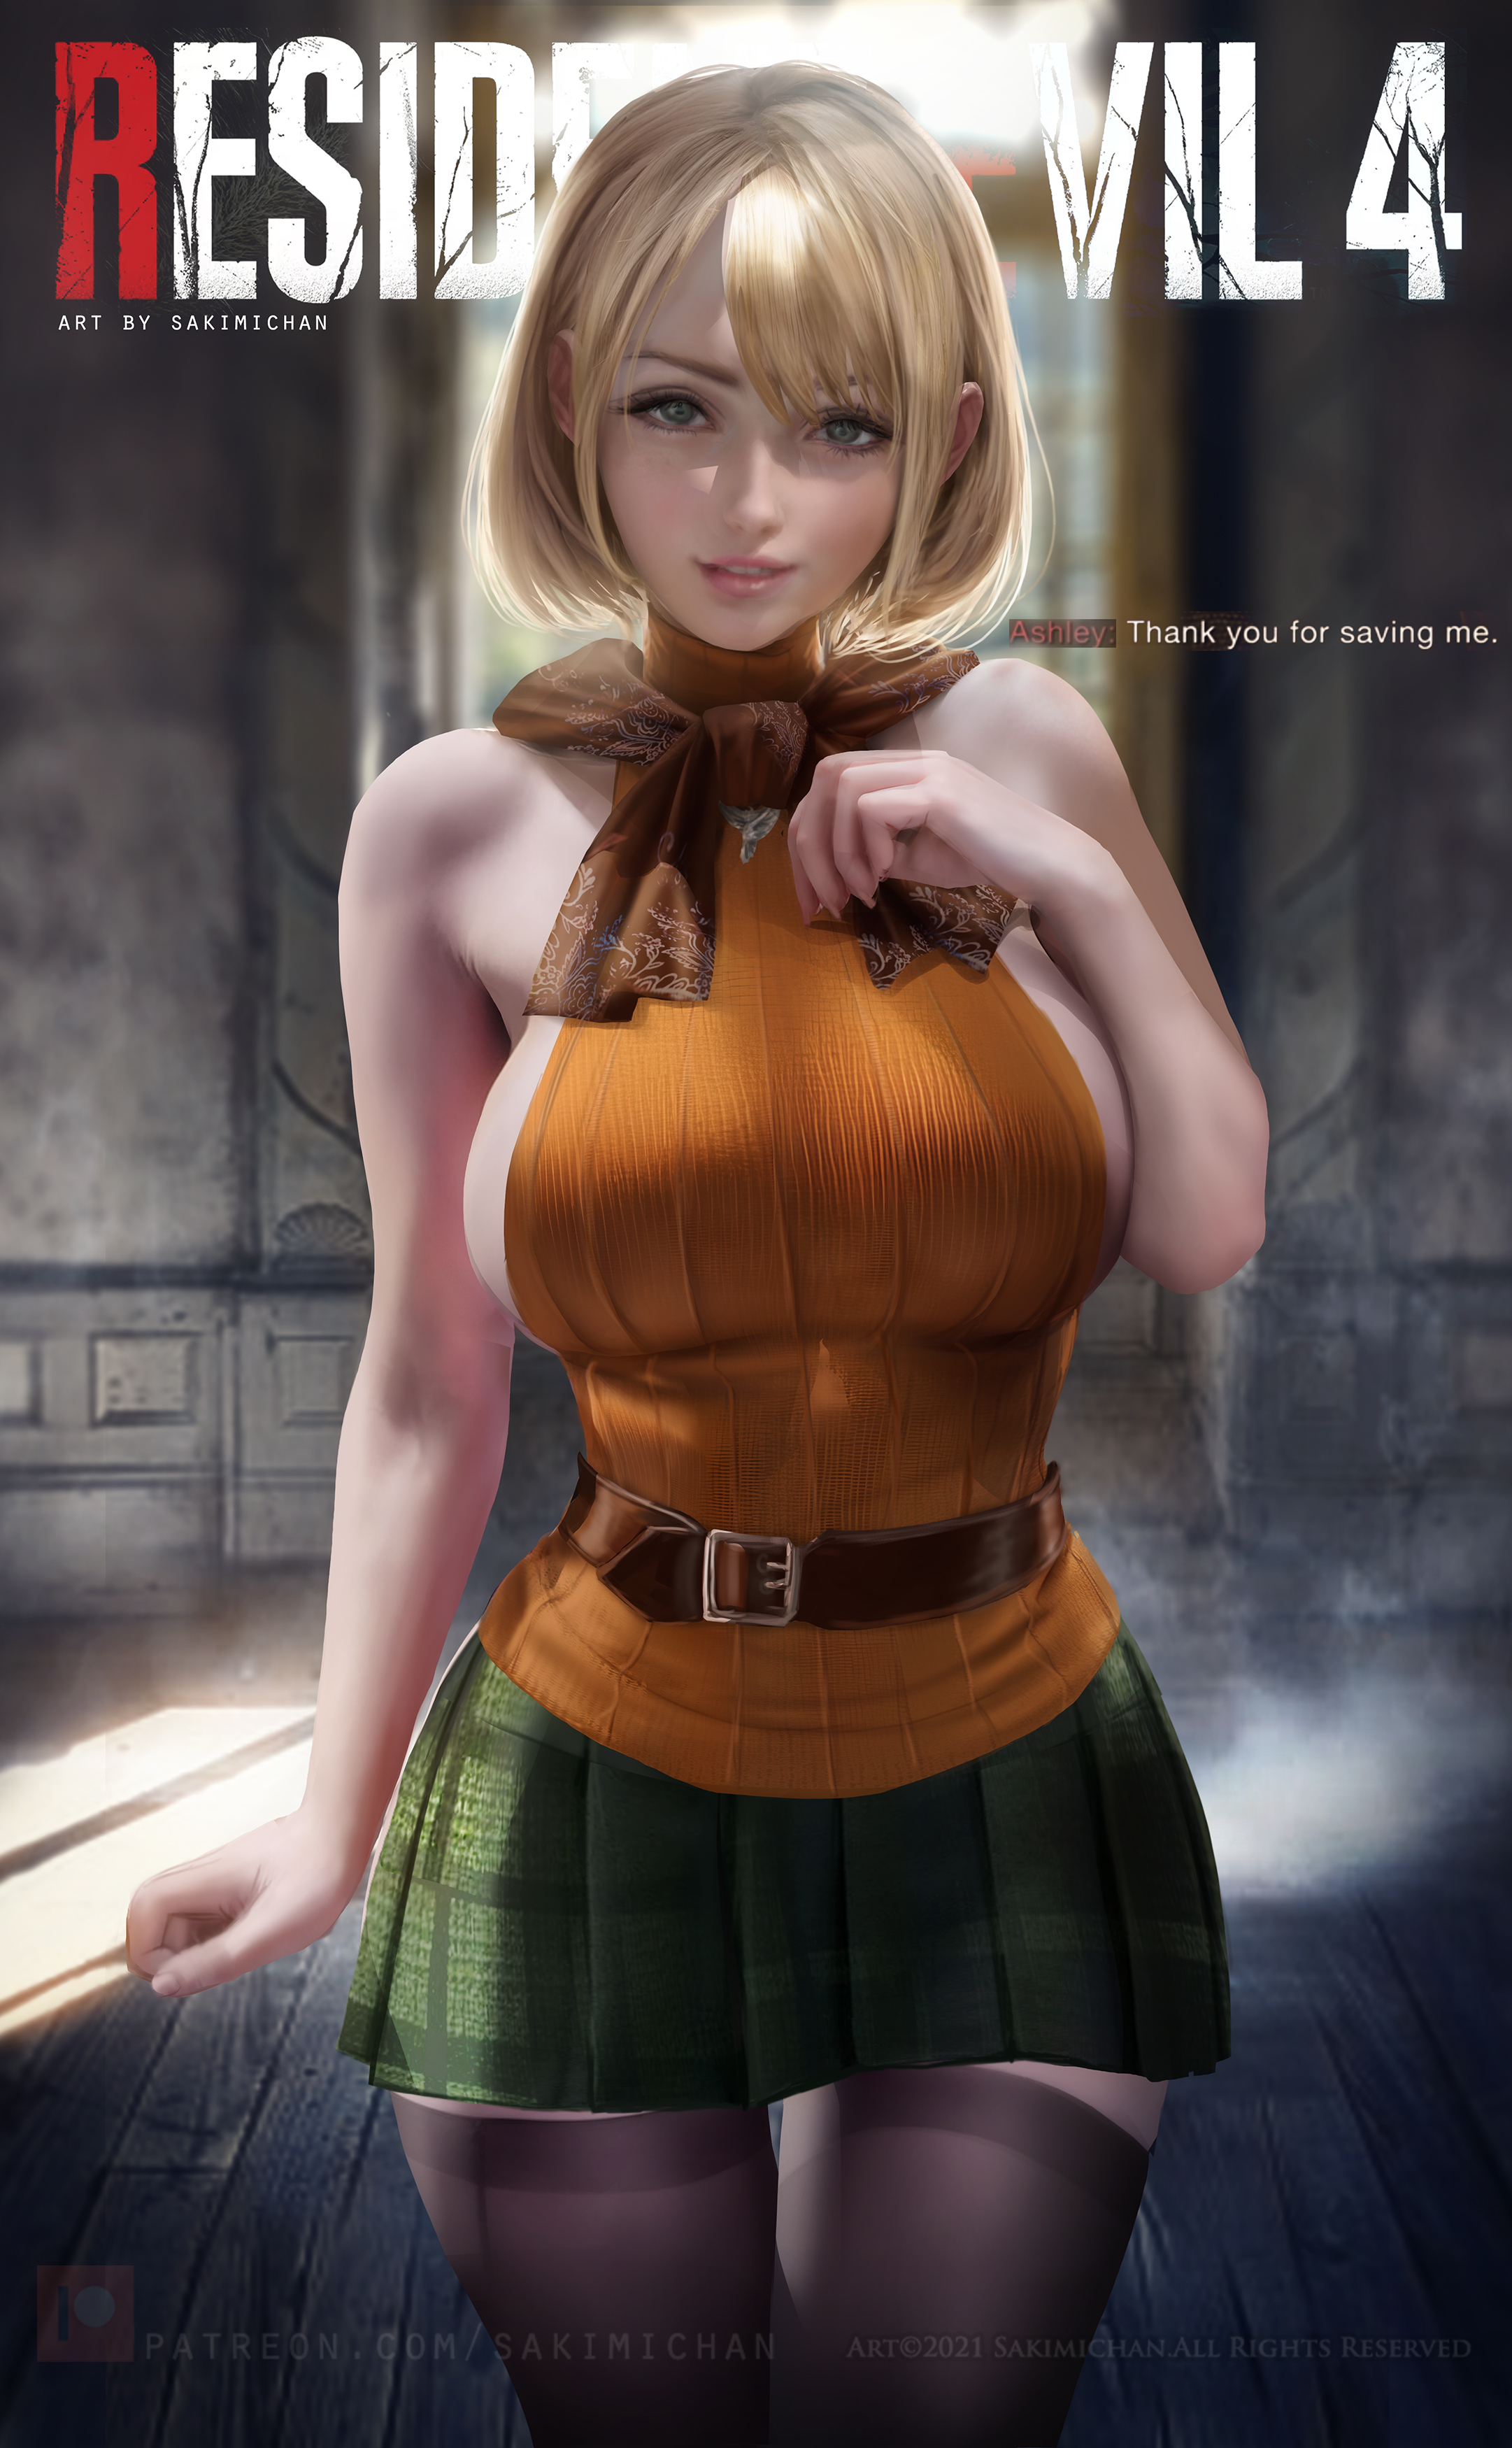 video game characters, blonde, Sakimichan, curvy, Ashley Graham